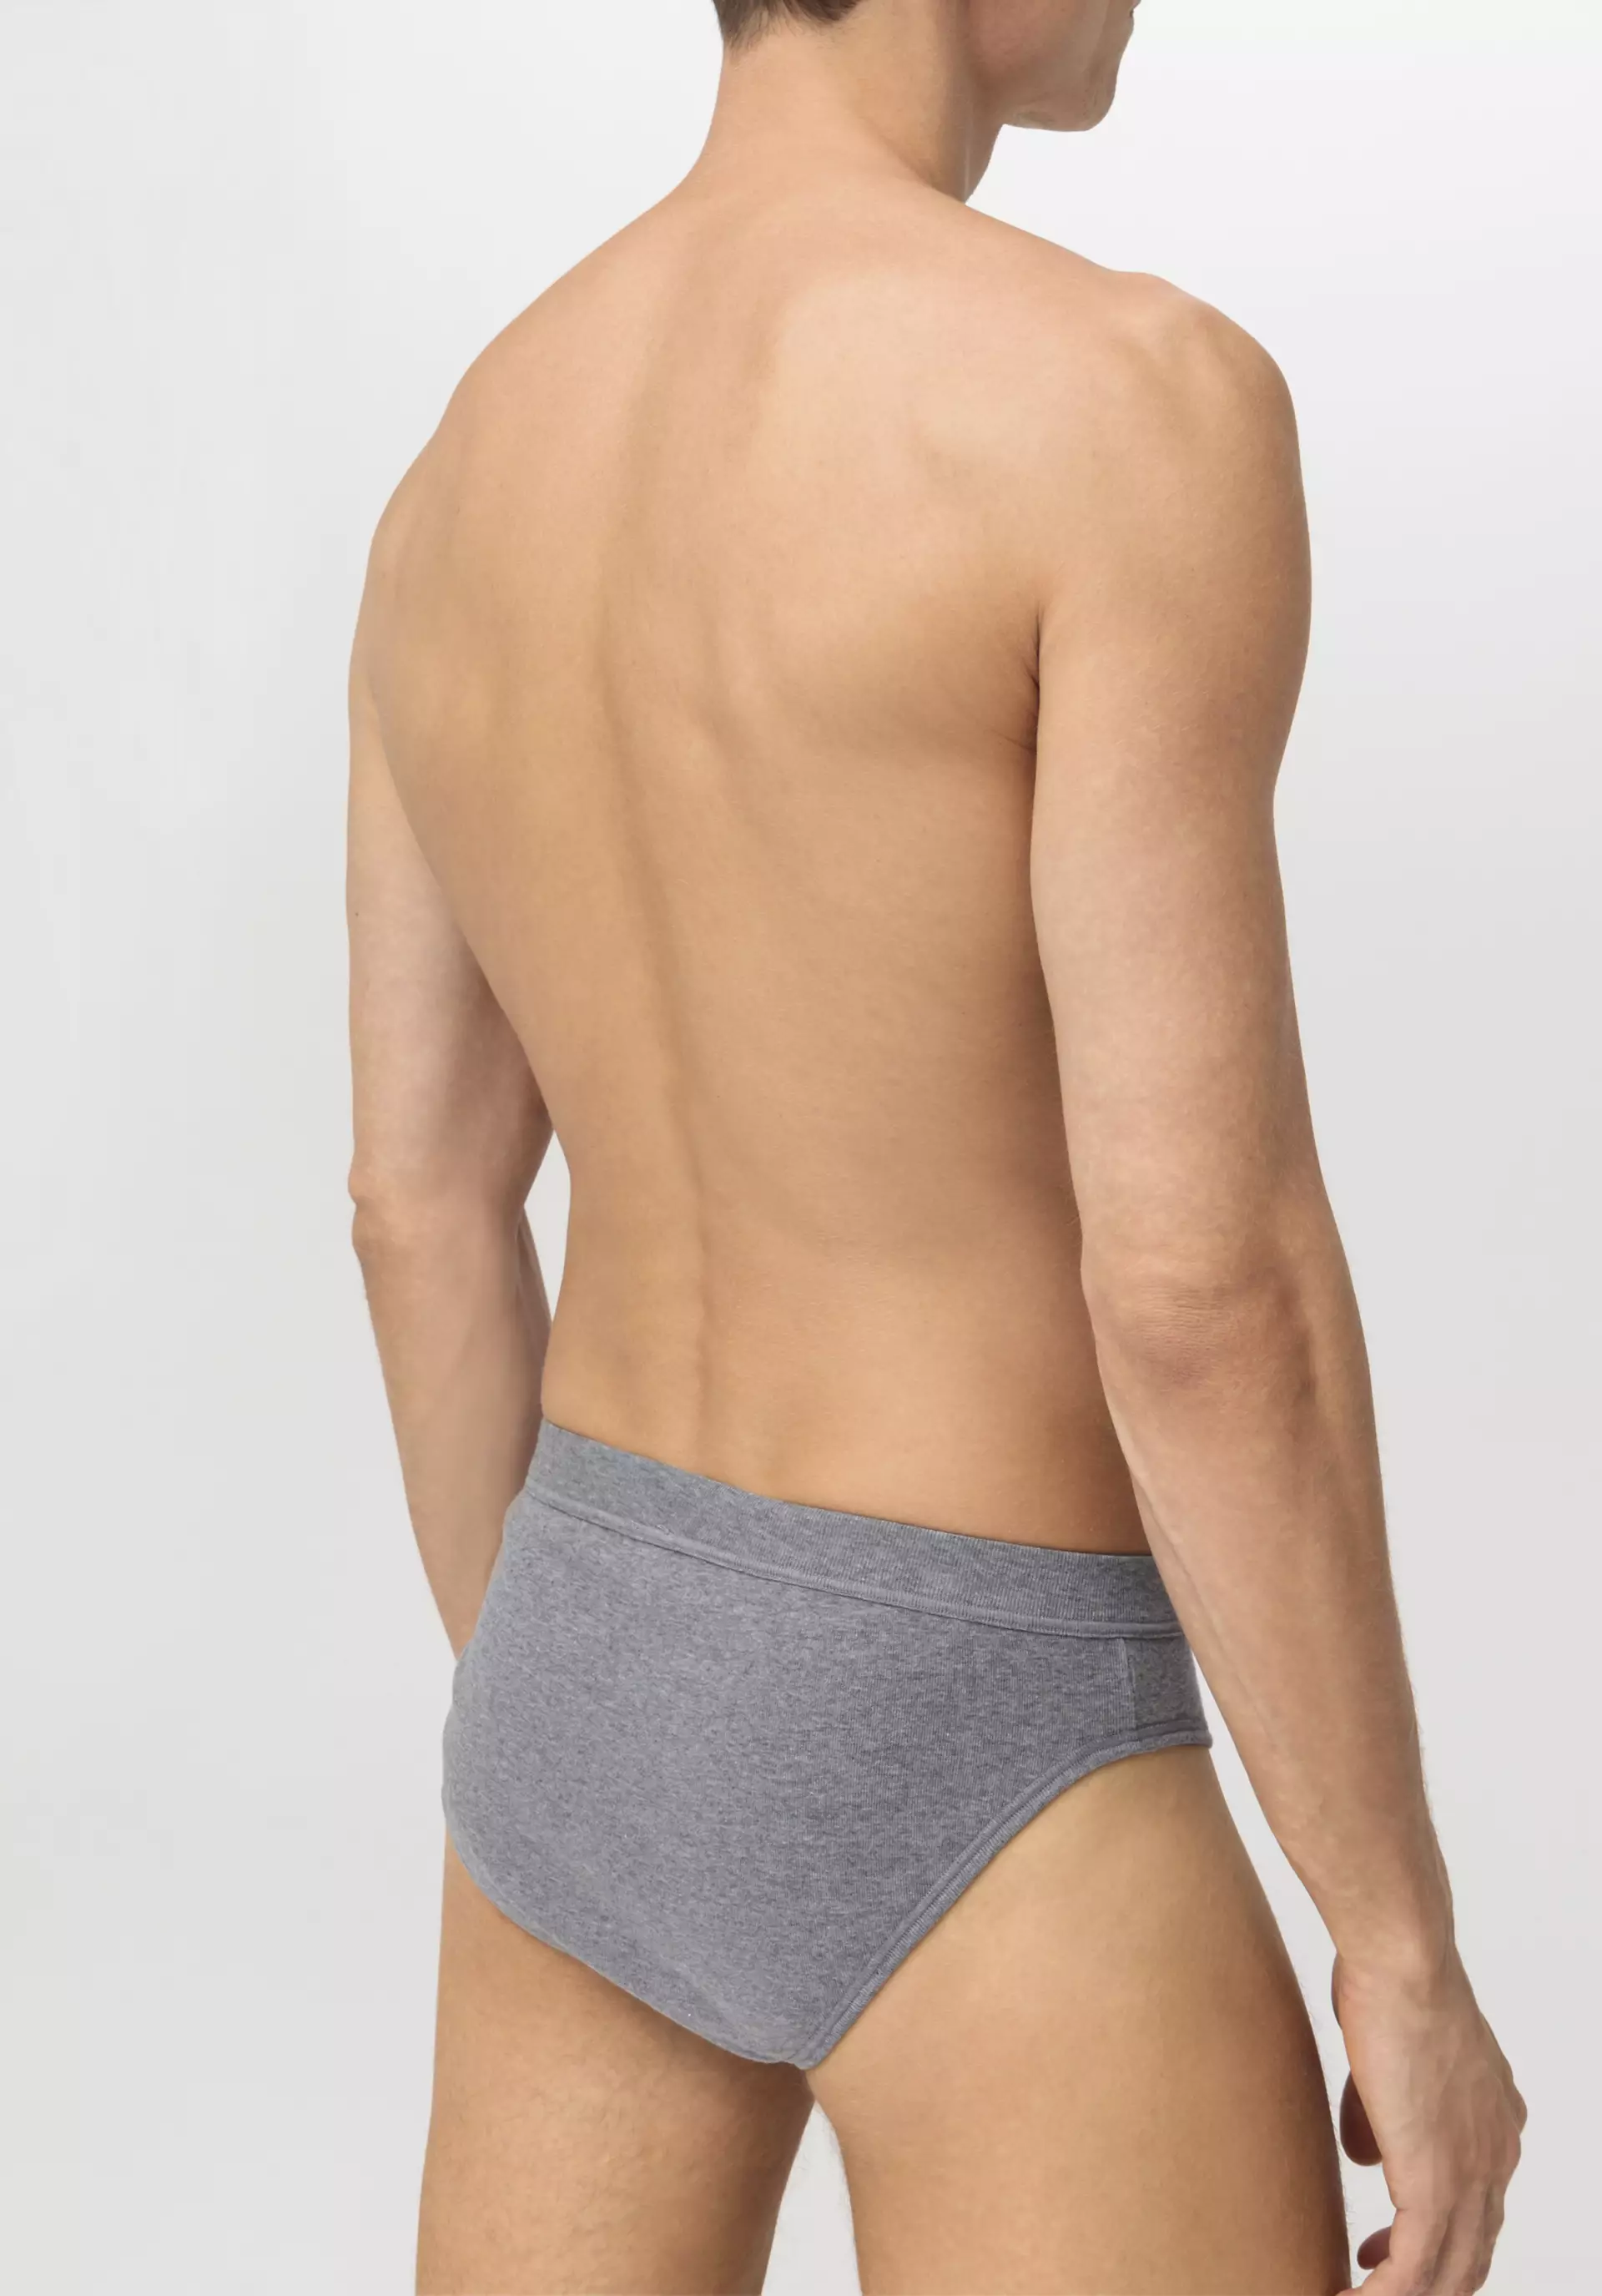 Men's Underwear, Made from Natural & Sustainable Materials